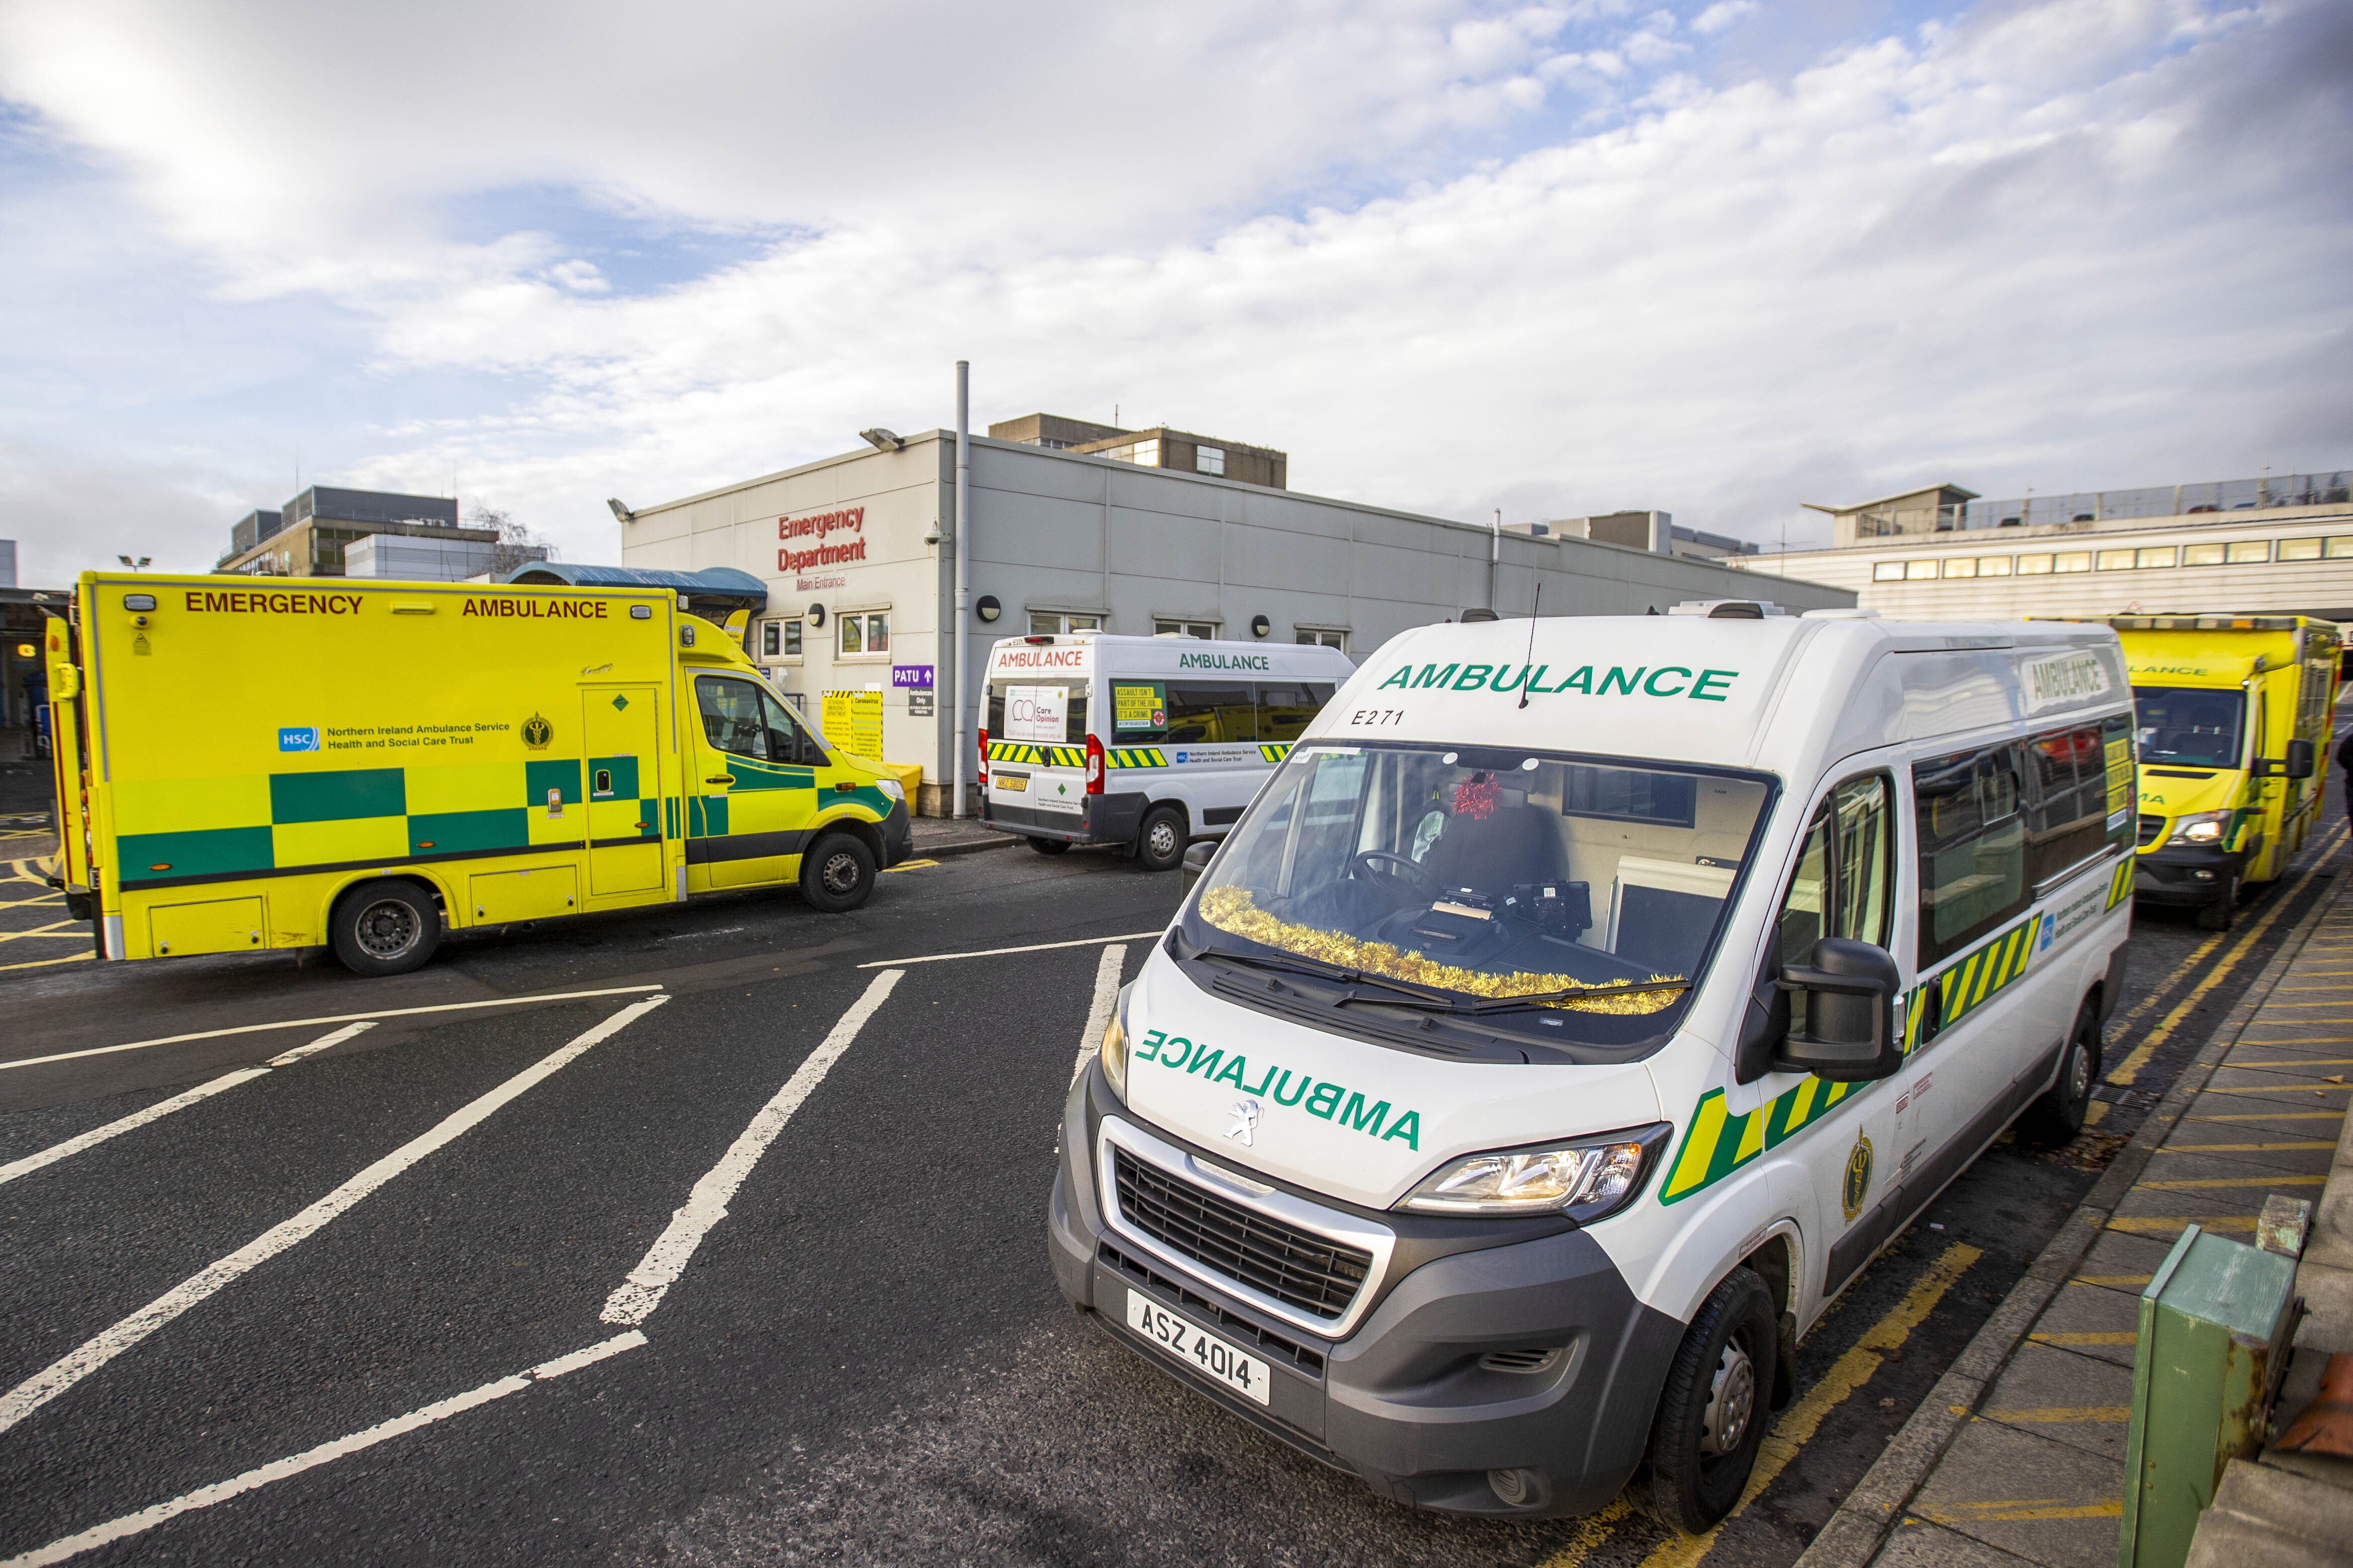 Ambulance parked outside main entrance to the Emergency Department of Dundonald Hospital in Belfast, Northern Ireland. (Liam McBurney/PA)